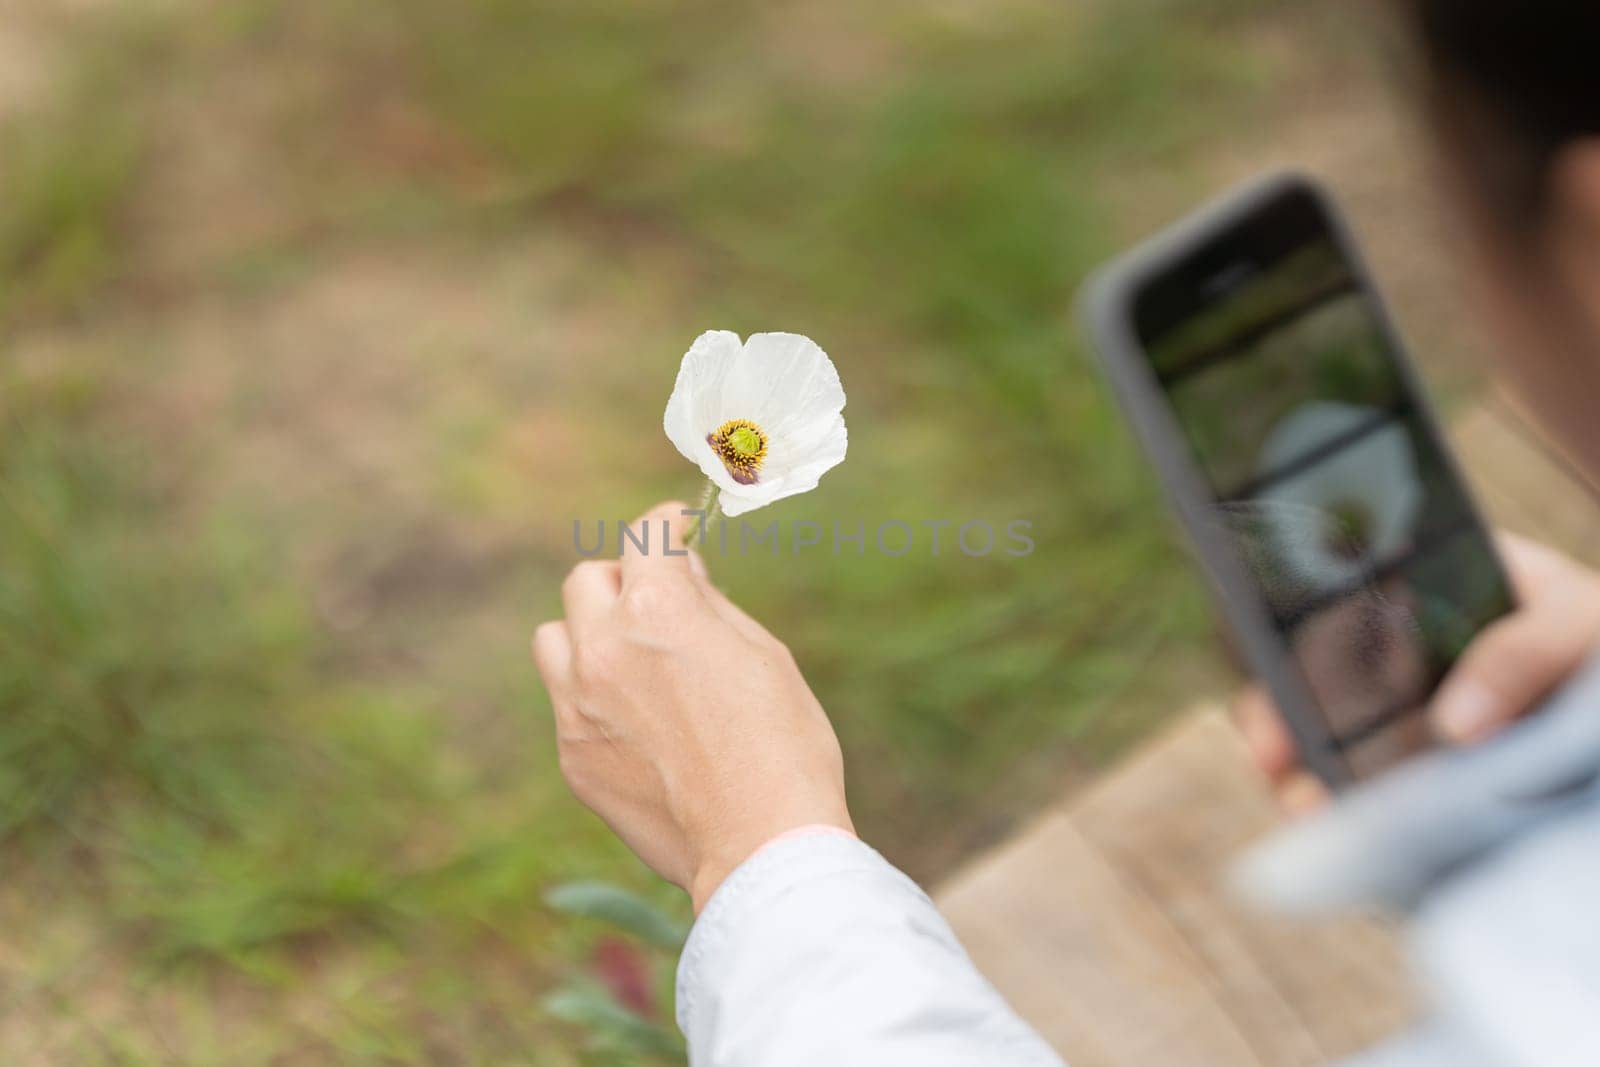 A person is taking a picture of a flower with a cell phone by Studia72